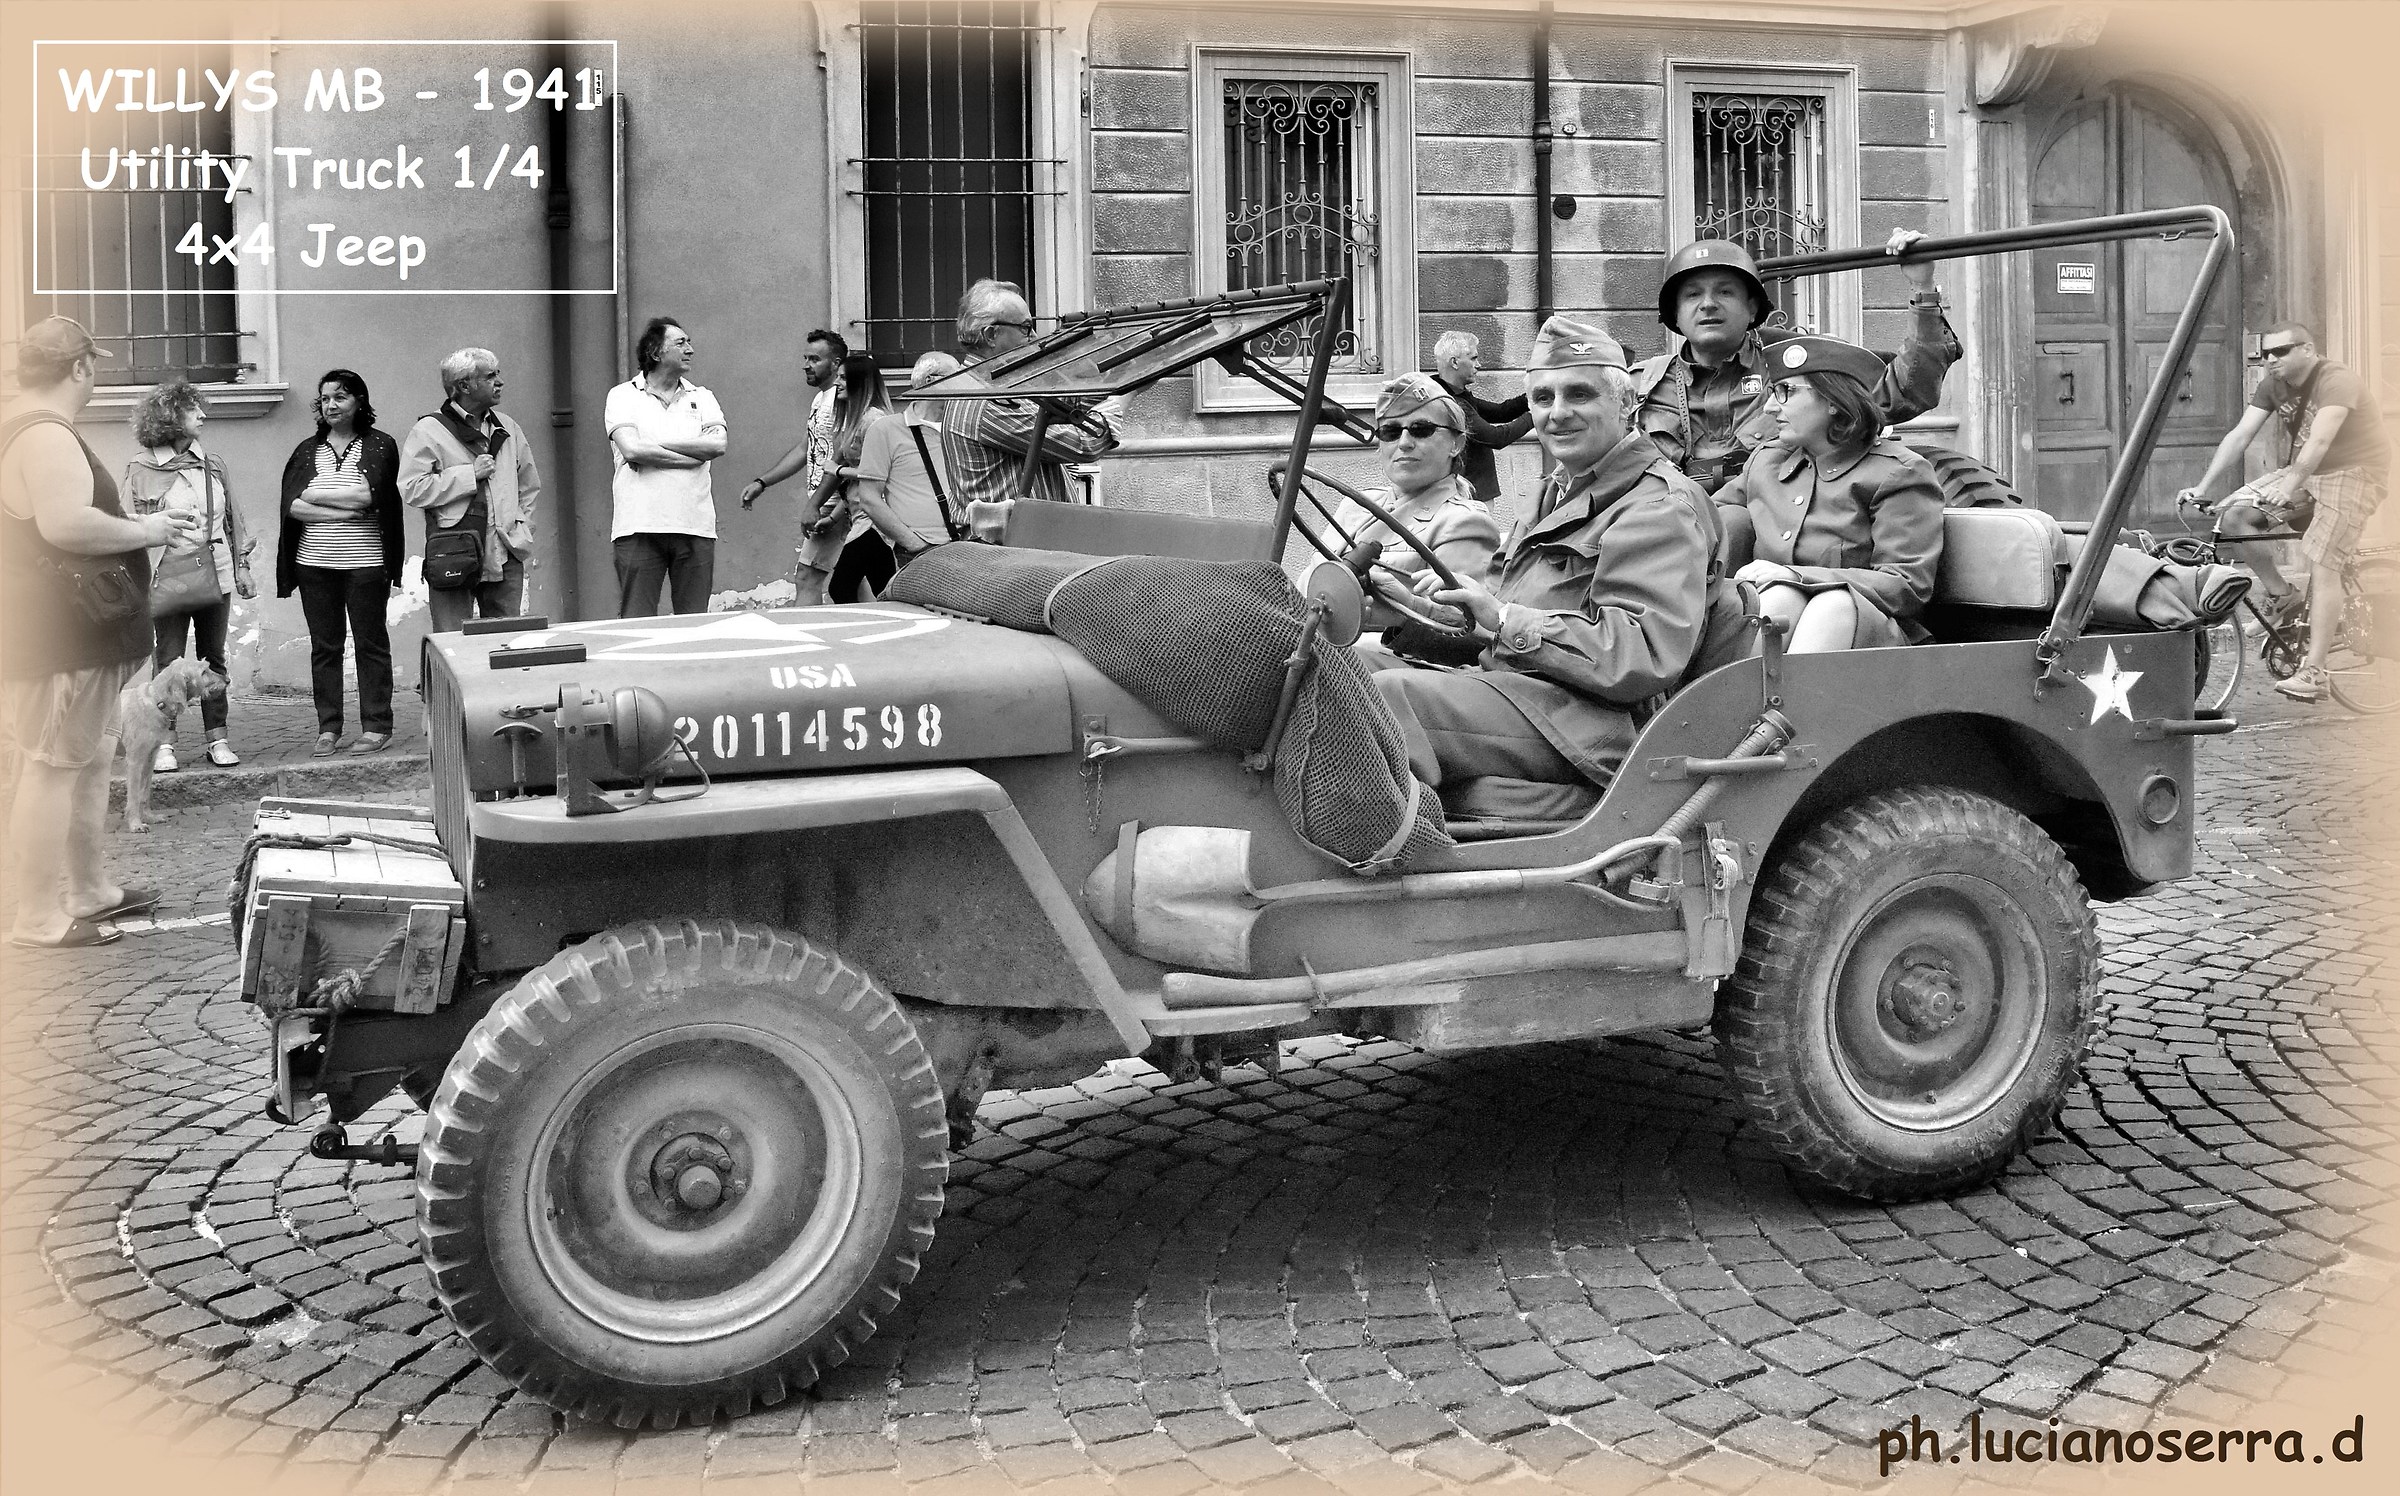 Willys MB - 1941...